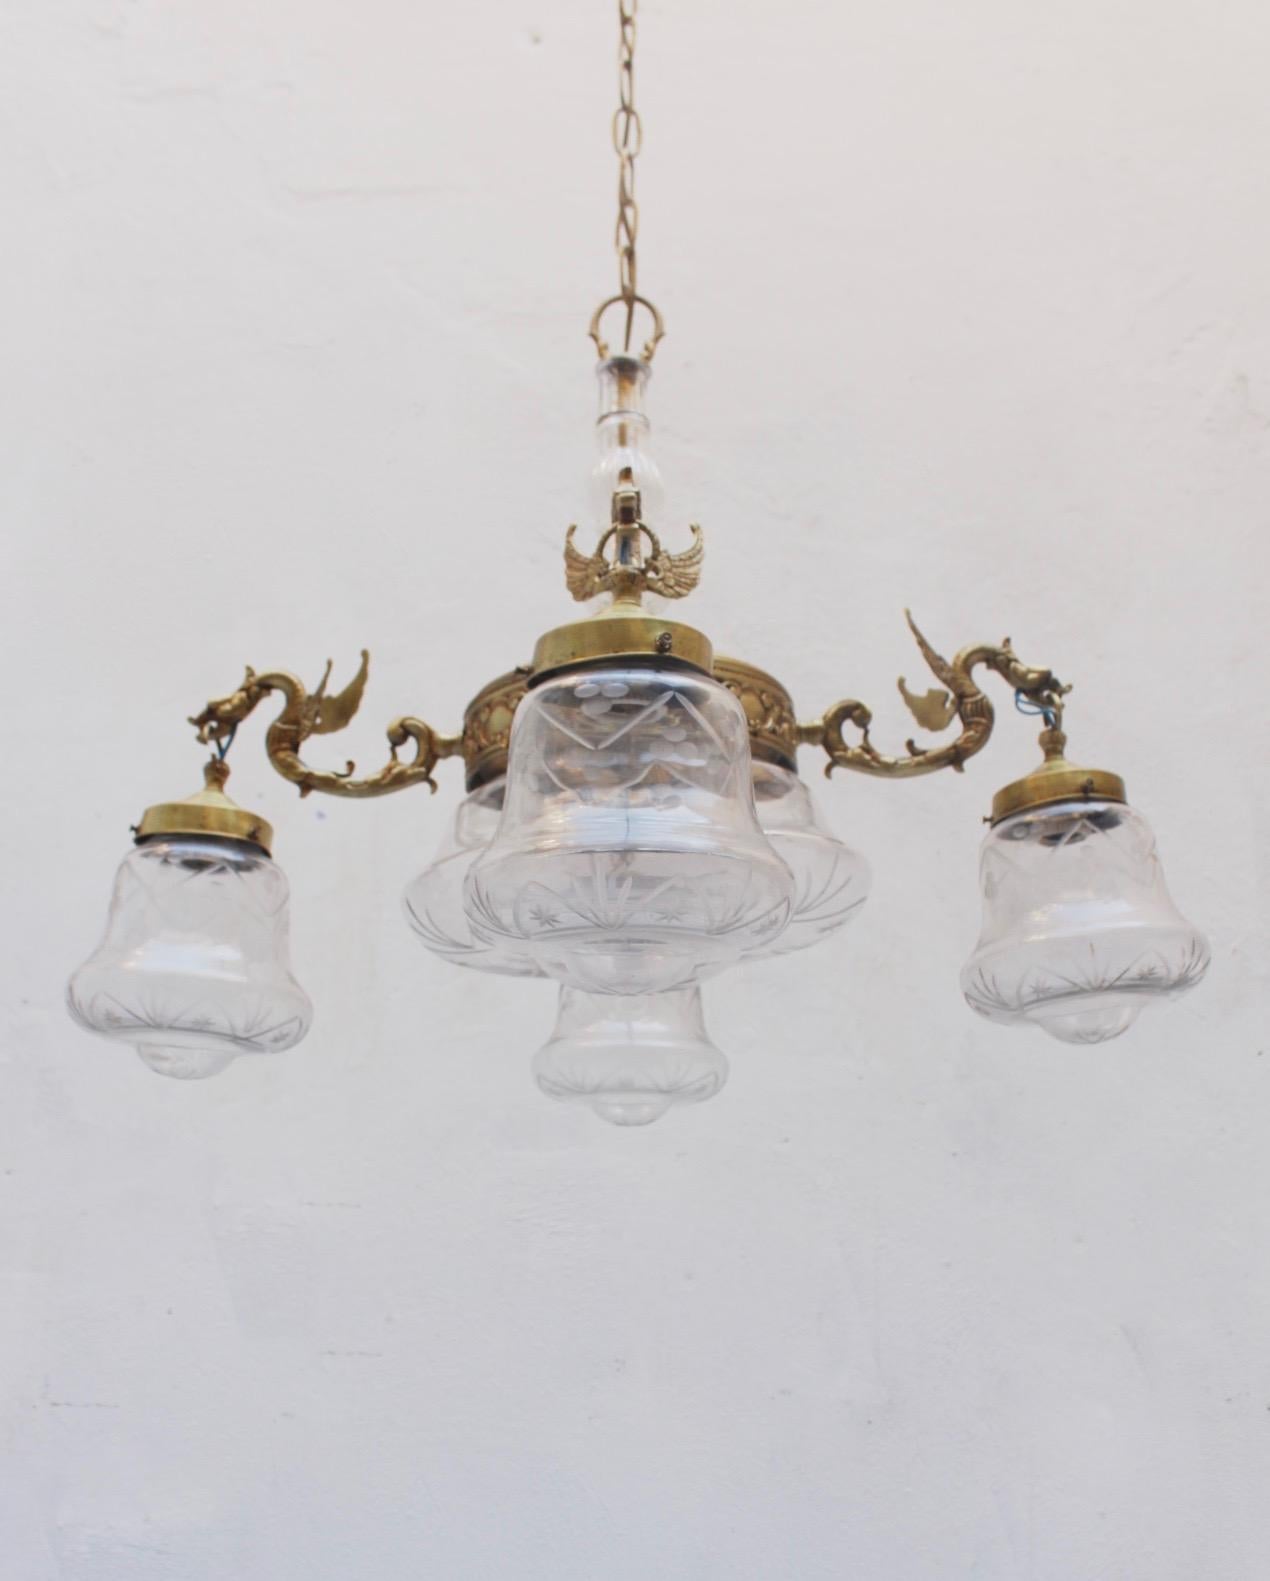 Midcentury brass and glass five lights dragon chandelier, 1950s.

Measures: Chains length: 63 cms.